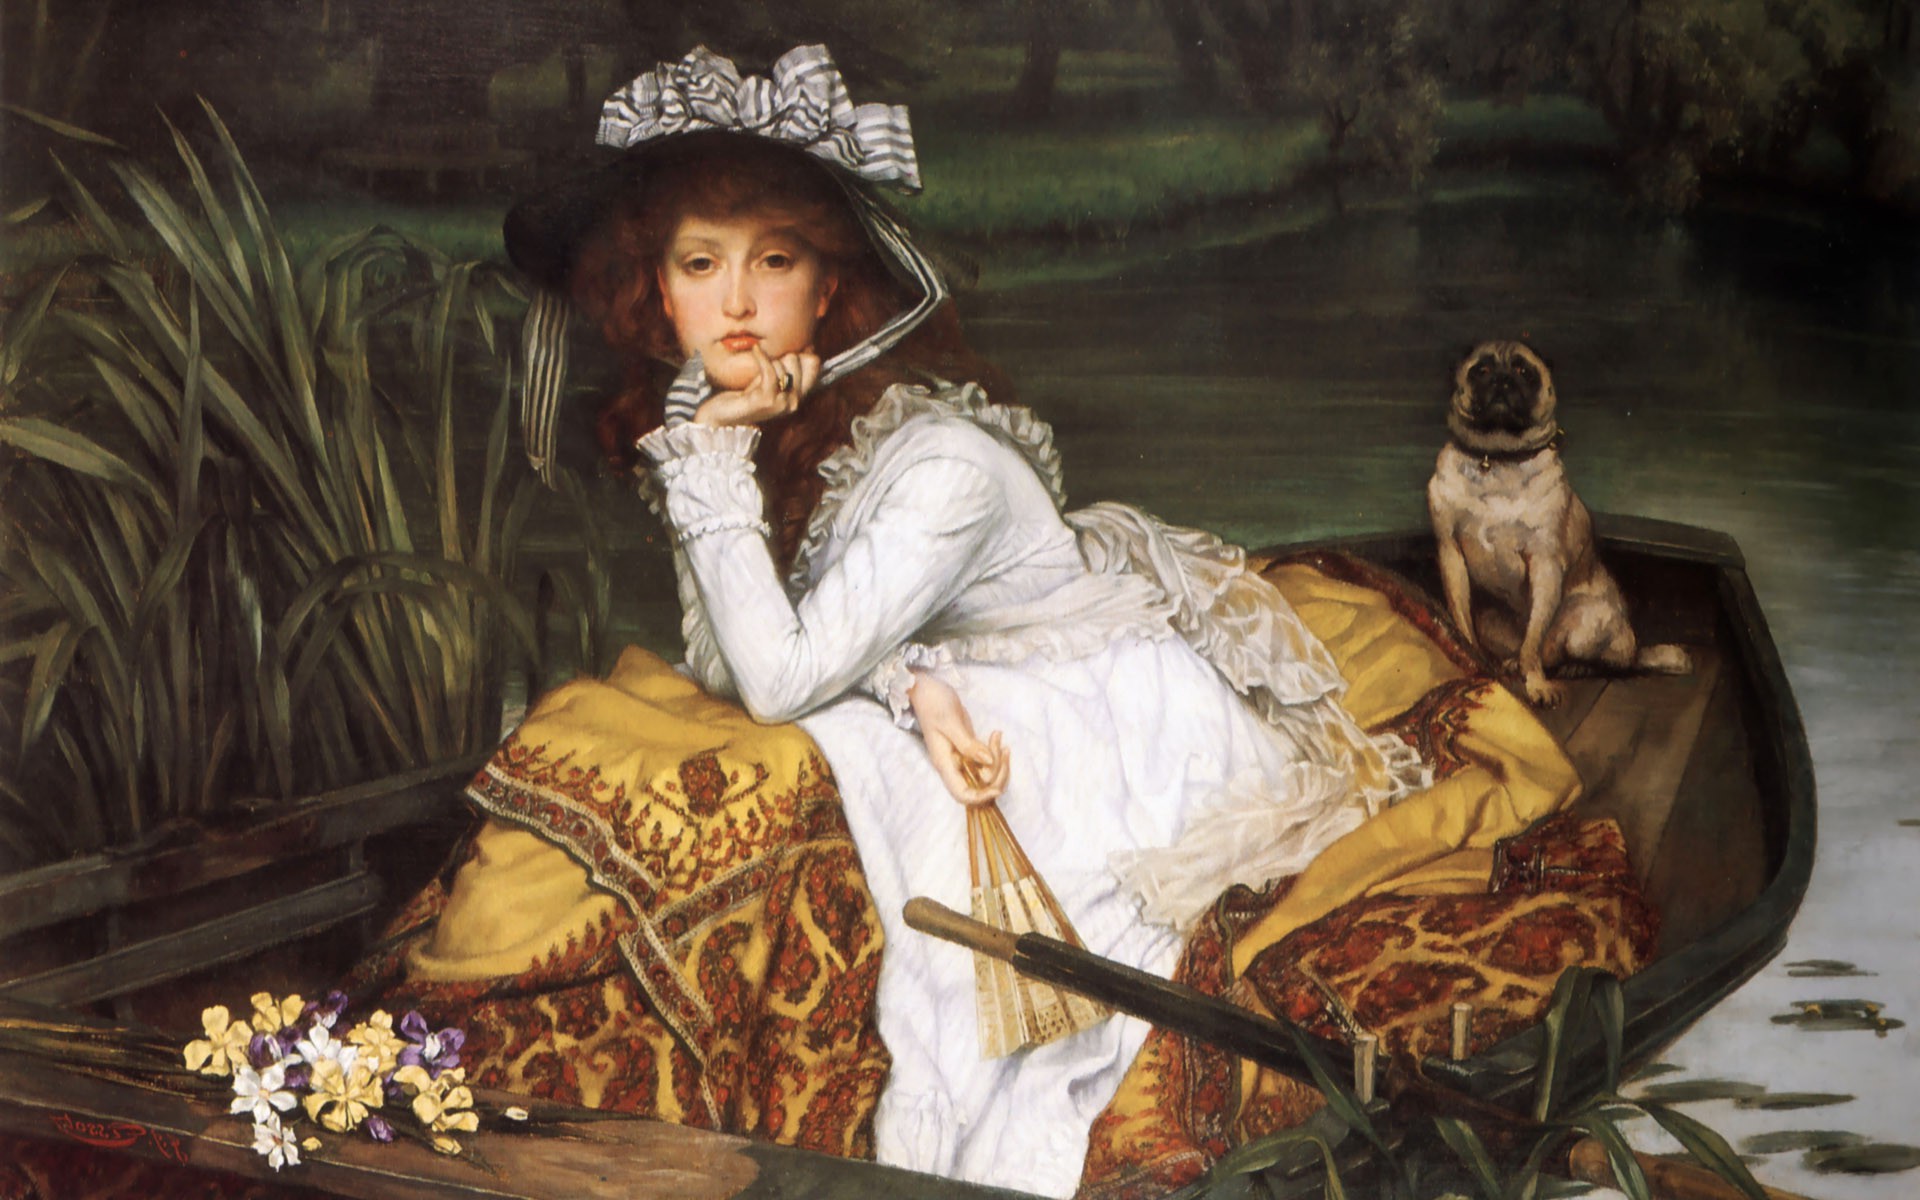 Famous Amd Historical Paintings - HD Wallpaper 